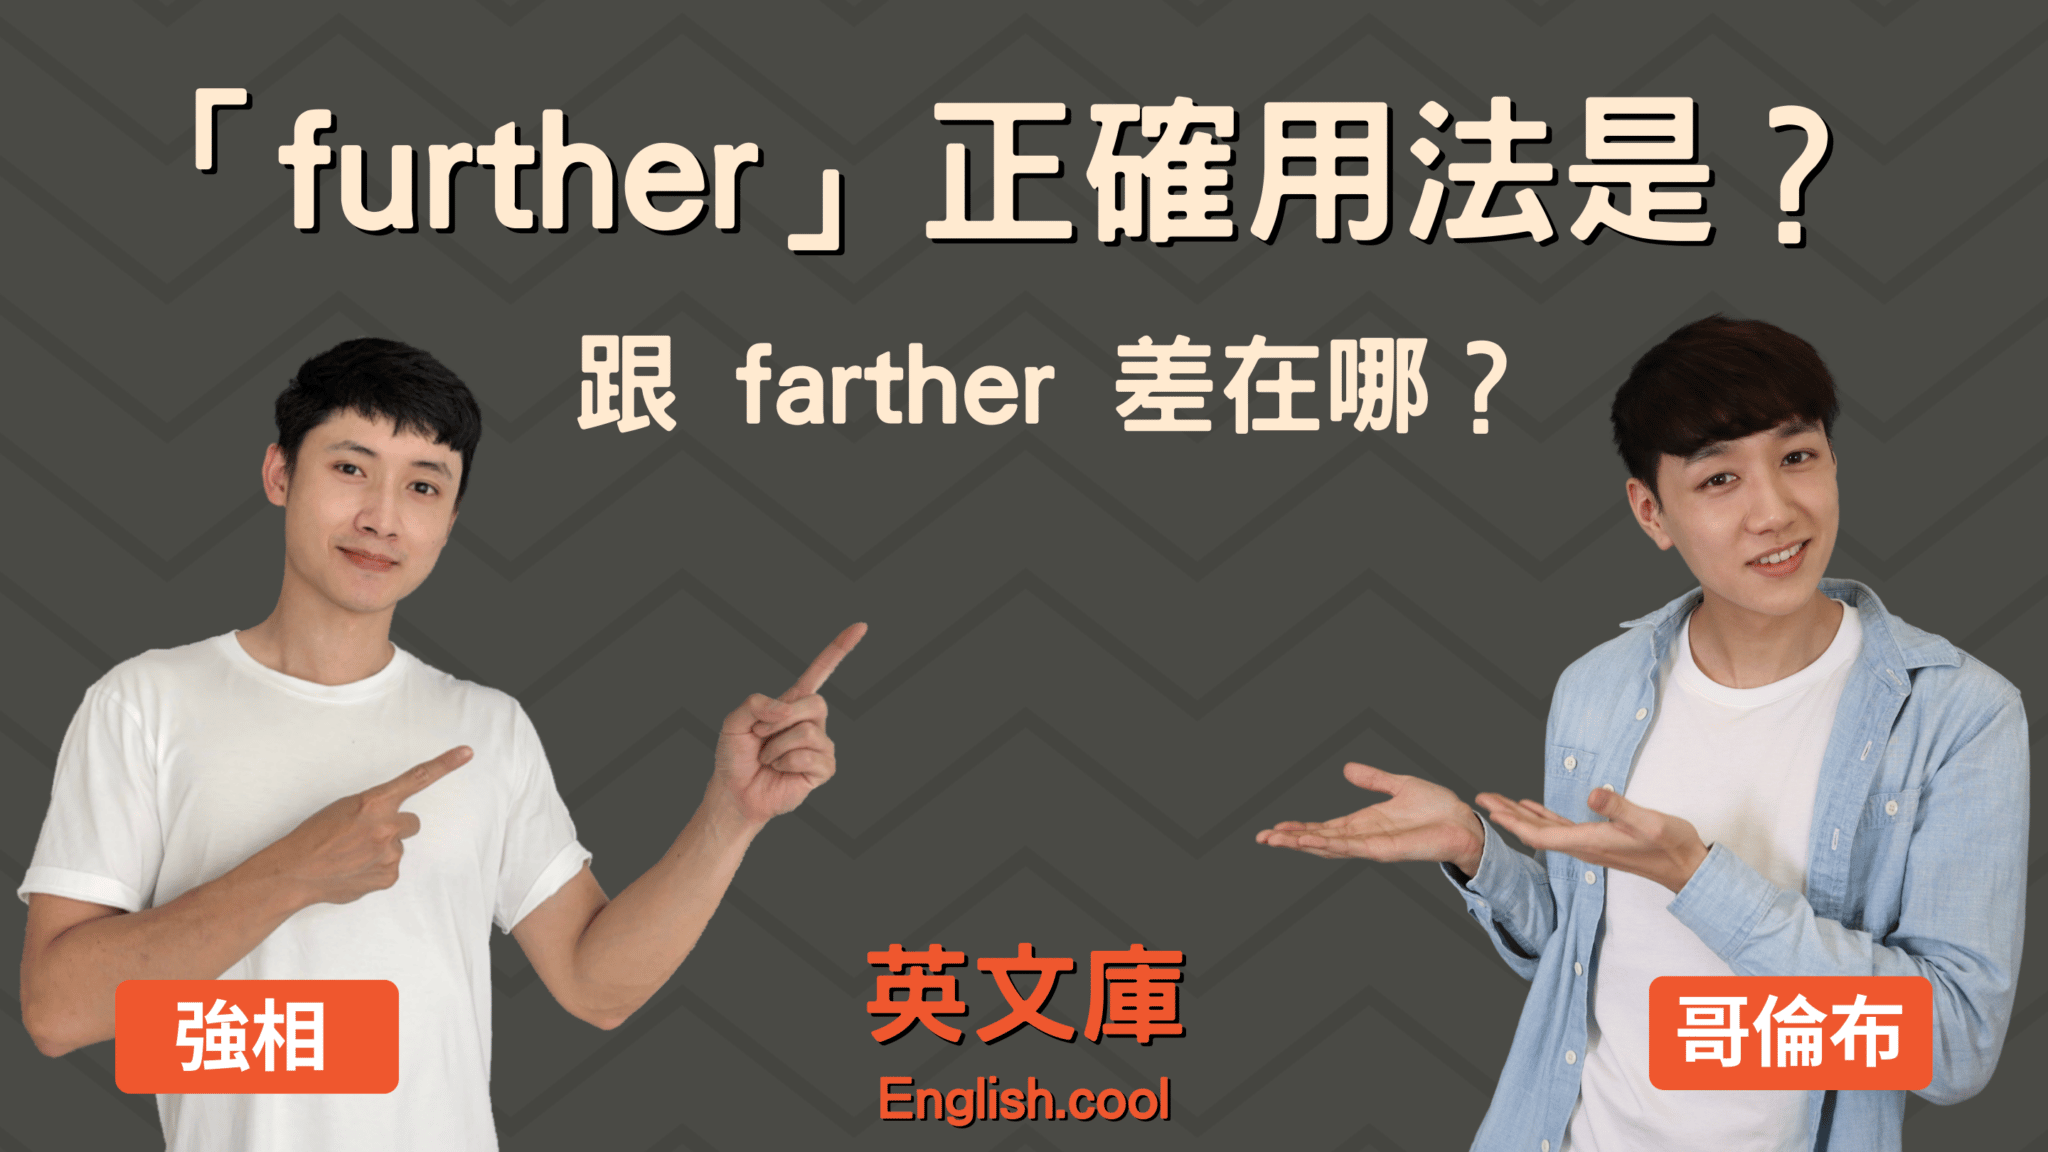 You are currently viewing 「further」正確用法是？和常搞混的「farther」差在哪？